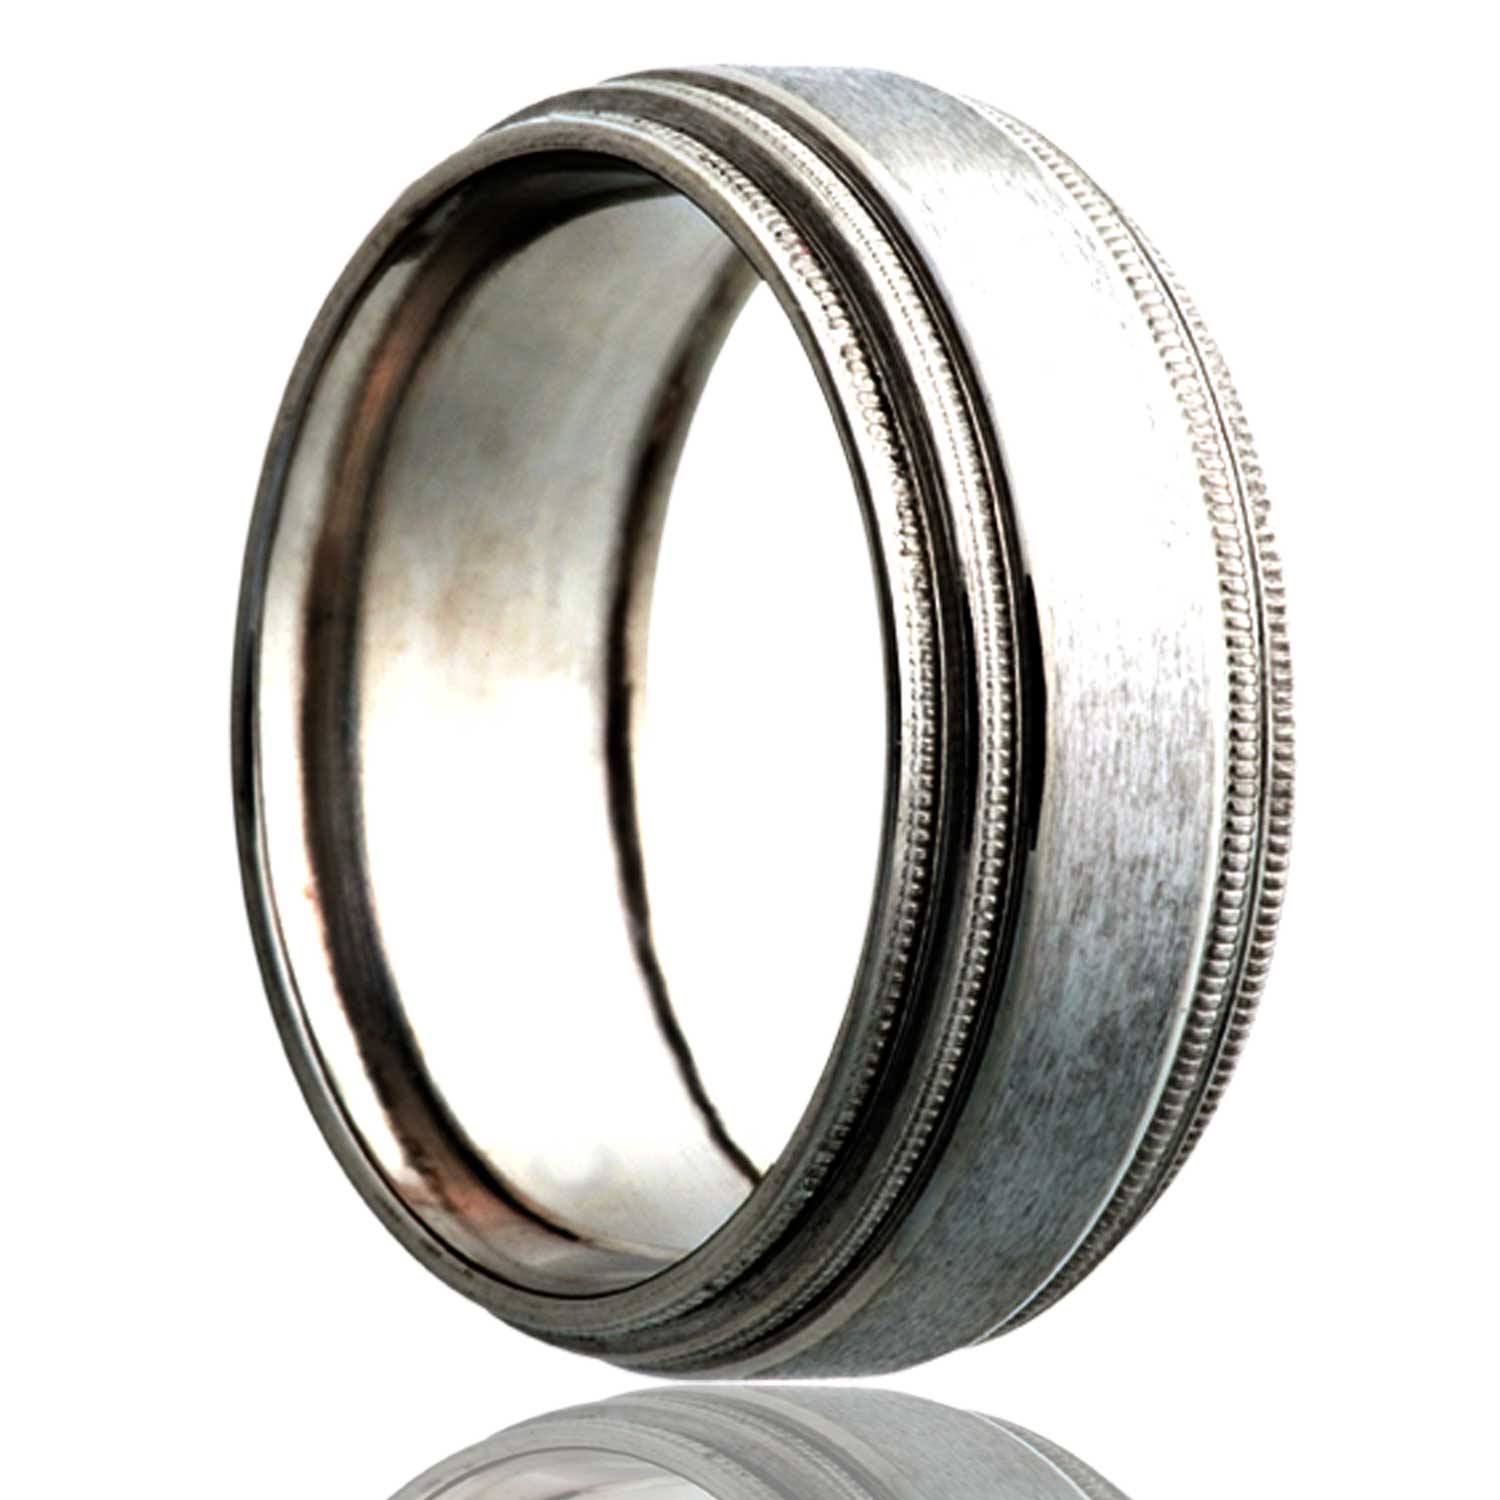 A satin finish titanium wedding band with stair steps edges displayed on a neutral white background.